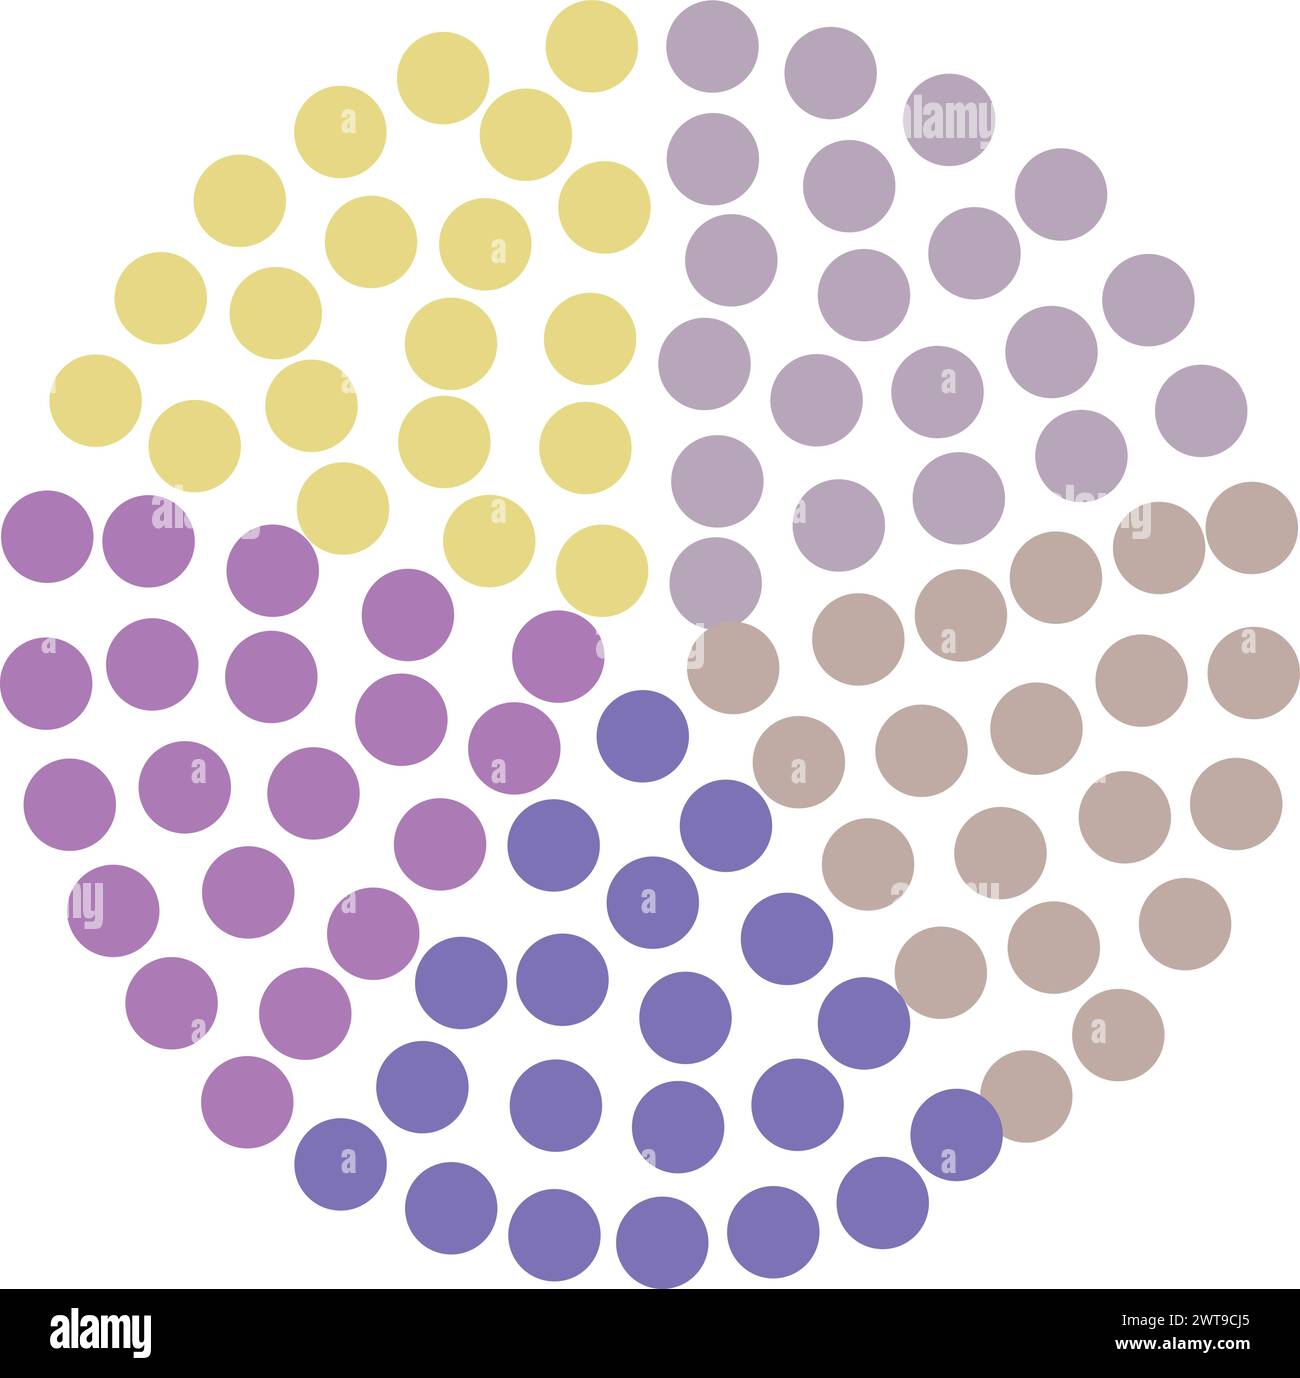 Pie chart dot pattern. Color point icon Stock Vector